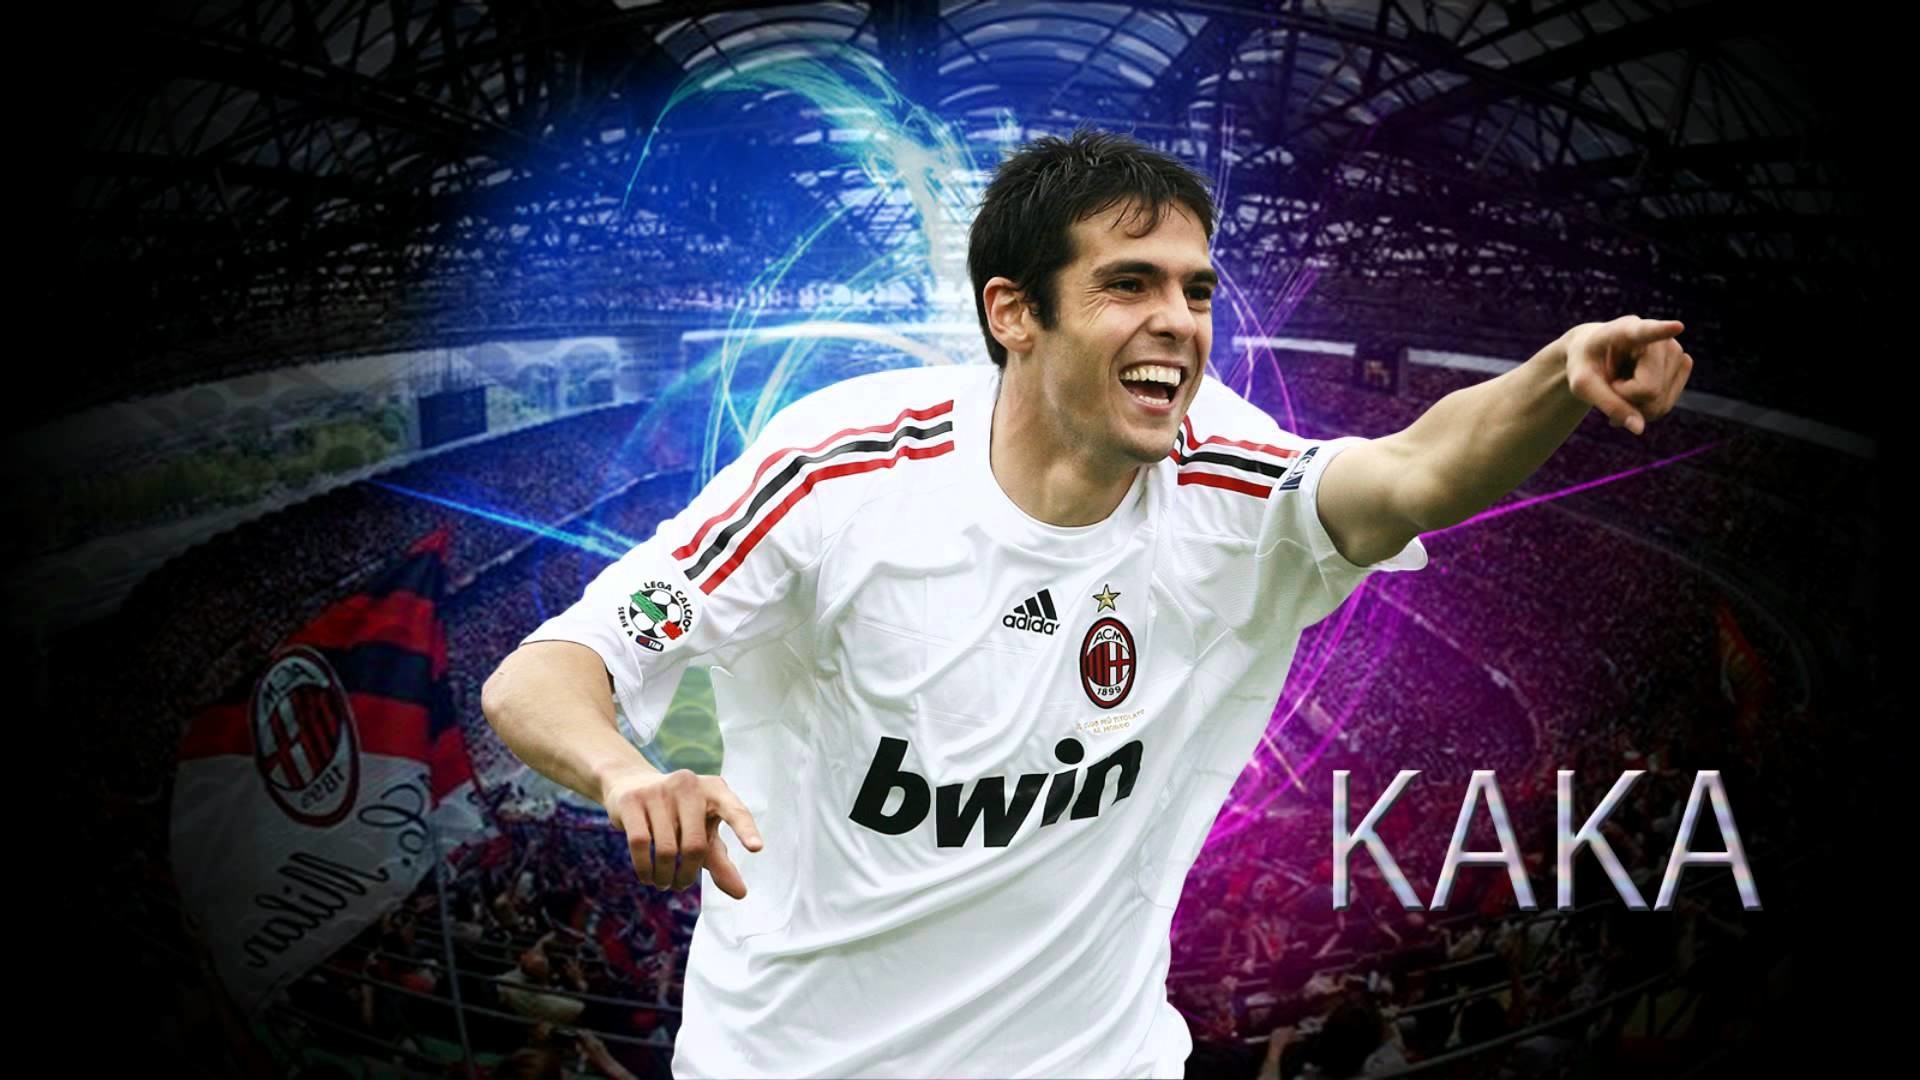 Kaka HD Wallpapers Images Pictures Photos Download